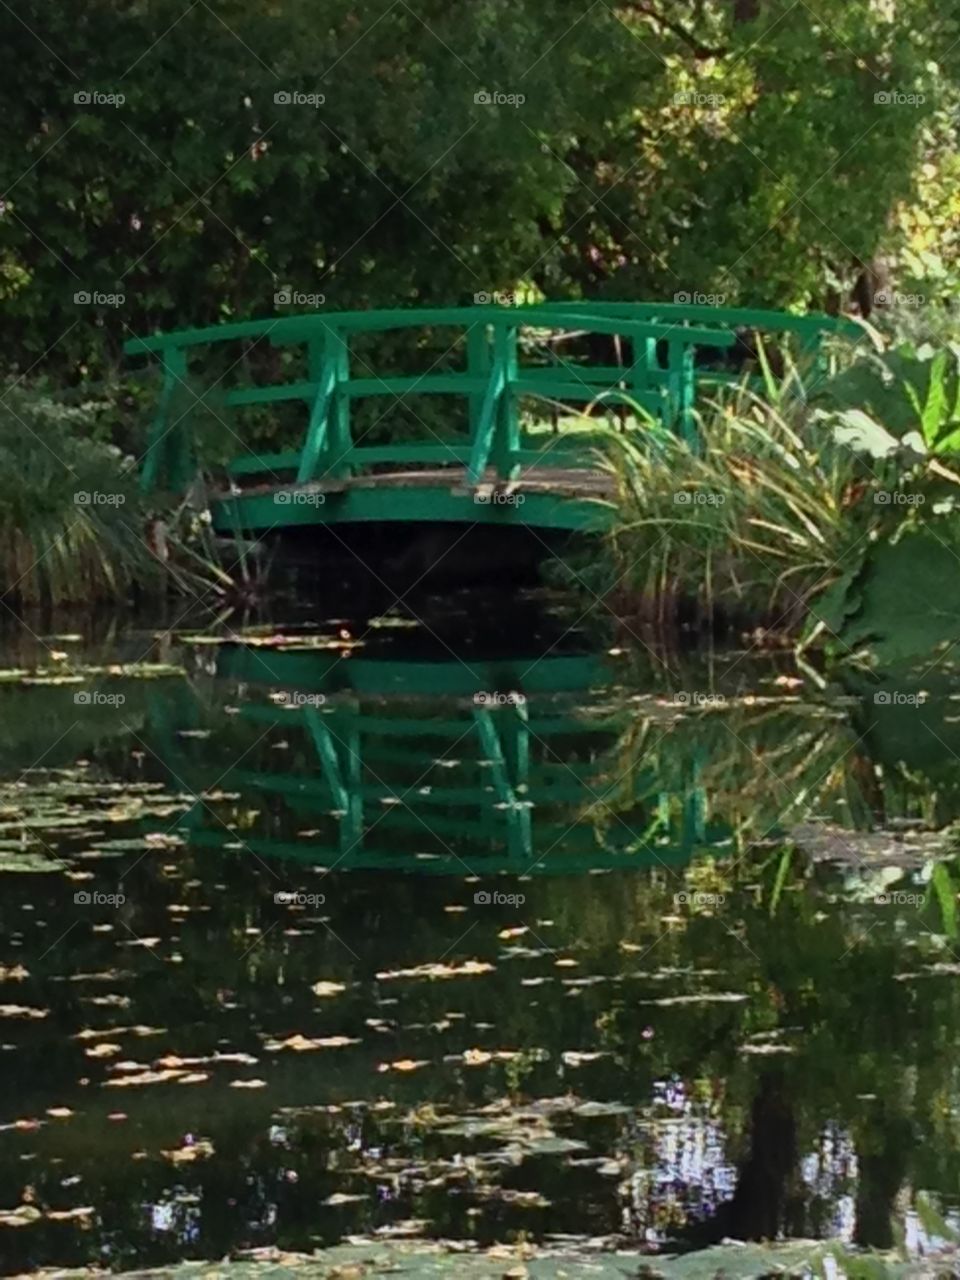 Famous bridge over a pond of water lillies, one of Monet's most renown works. 